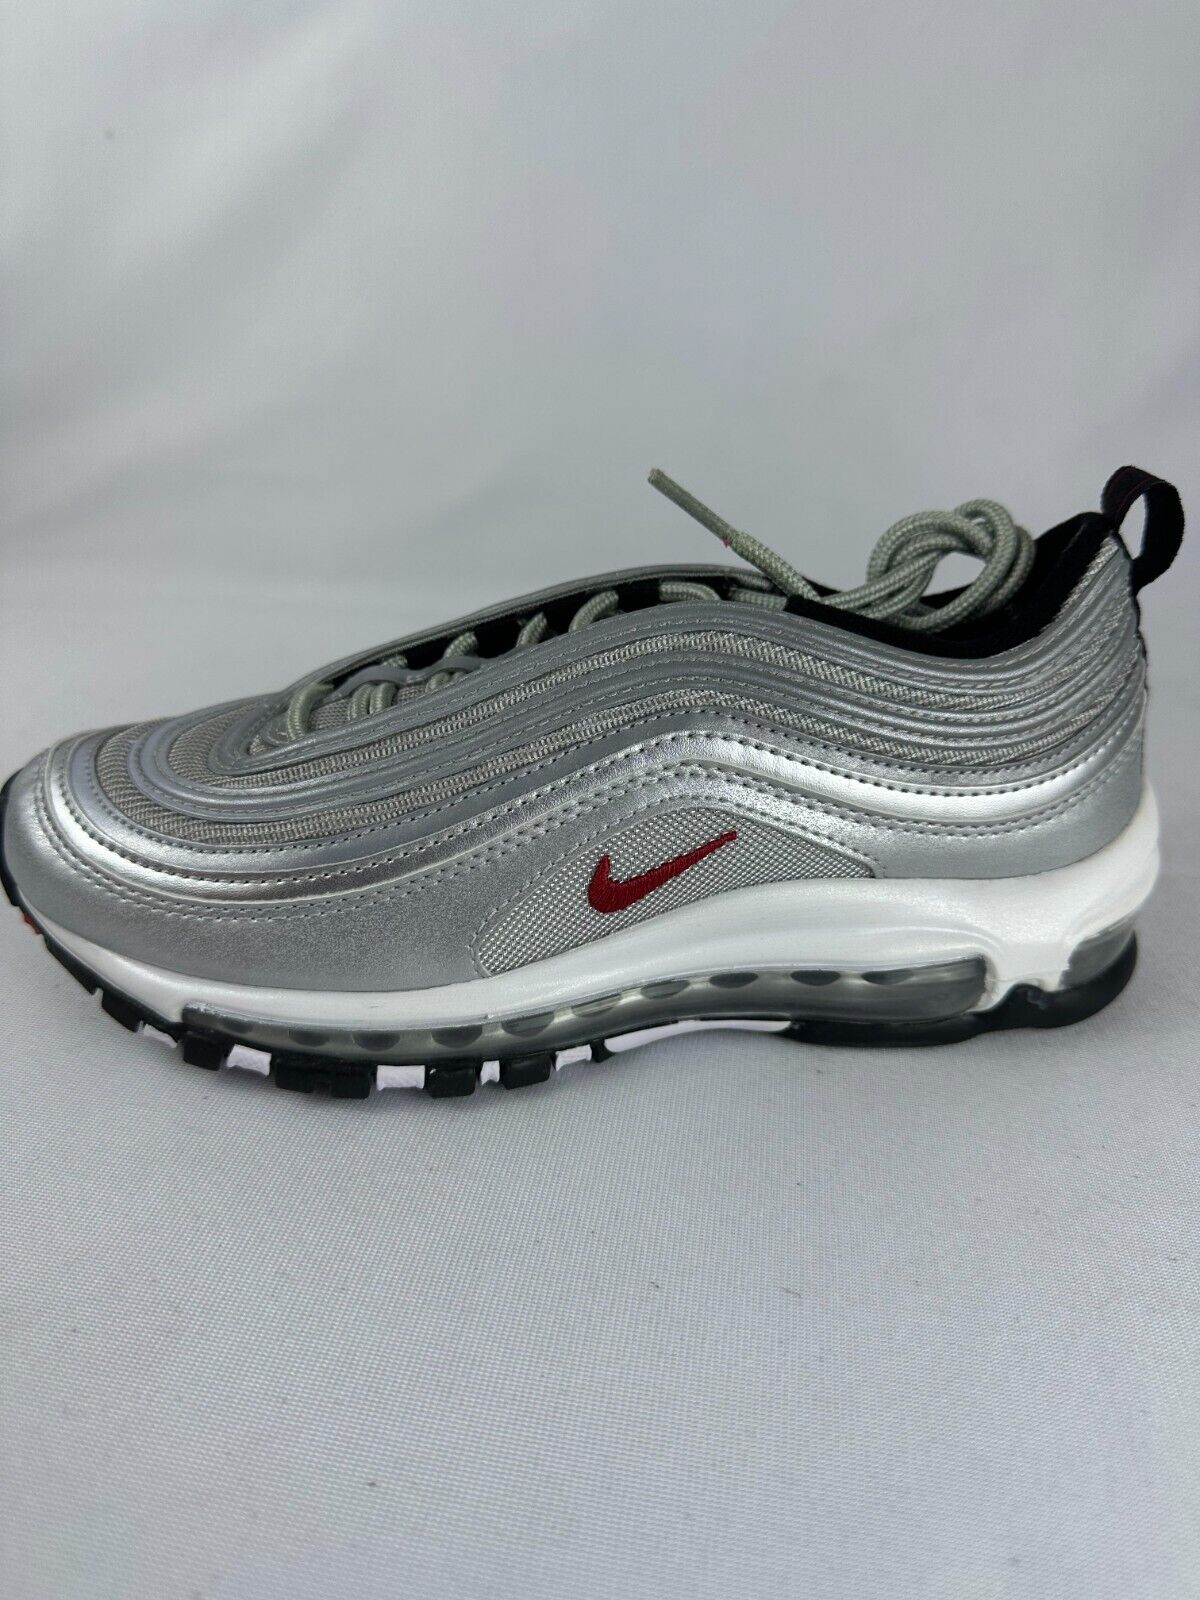 Nike Youth 5Y Air Max 97 OG QS Silver Bullet Running Shoes Sneakers 918890-001